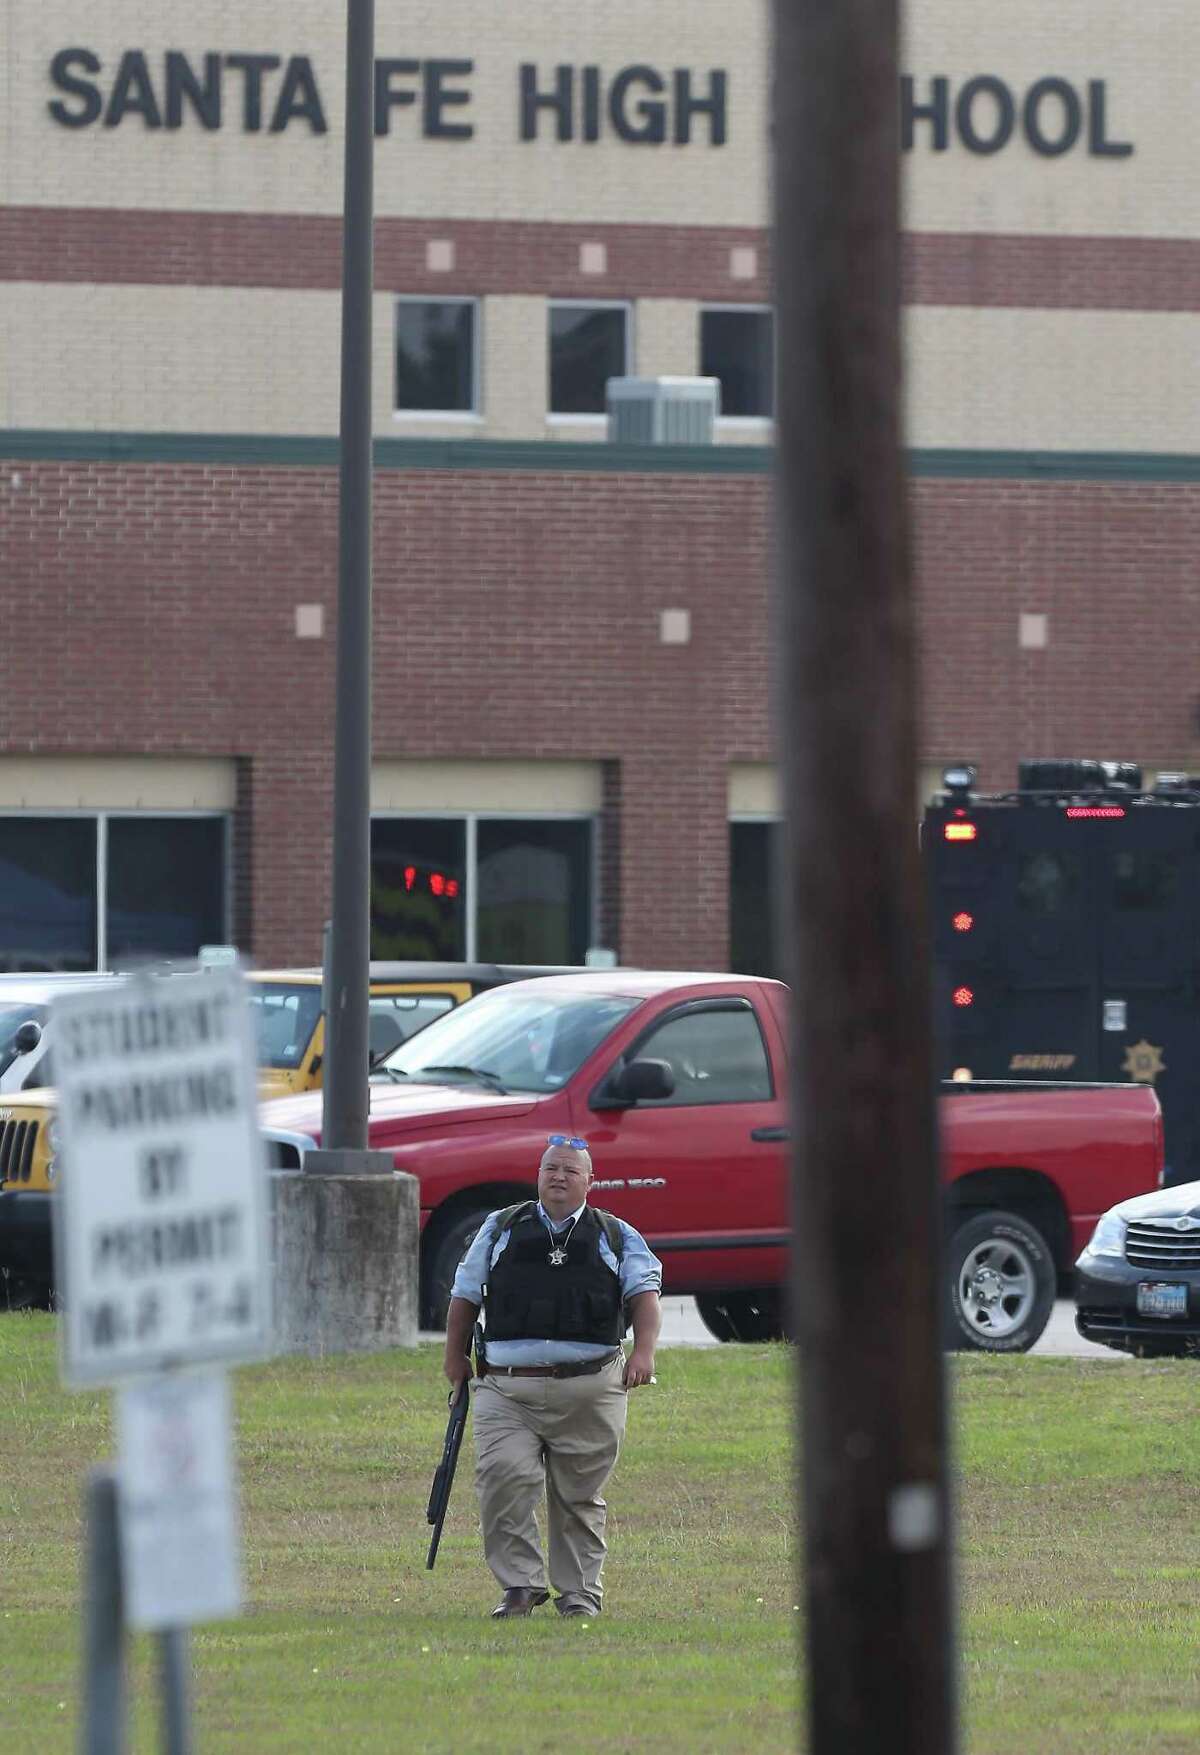 A law enforcement officer leaves Santa Fe High School in May 2018, when police say a student shot and killed 10 people at the campus. Many school districts have increased their police presence and safety measures at campuses in the wake of numerous school shootings in recent years.